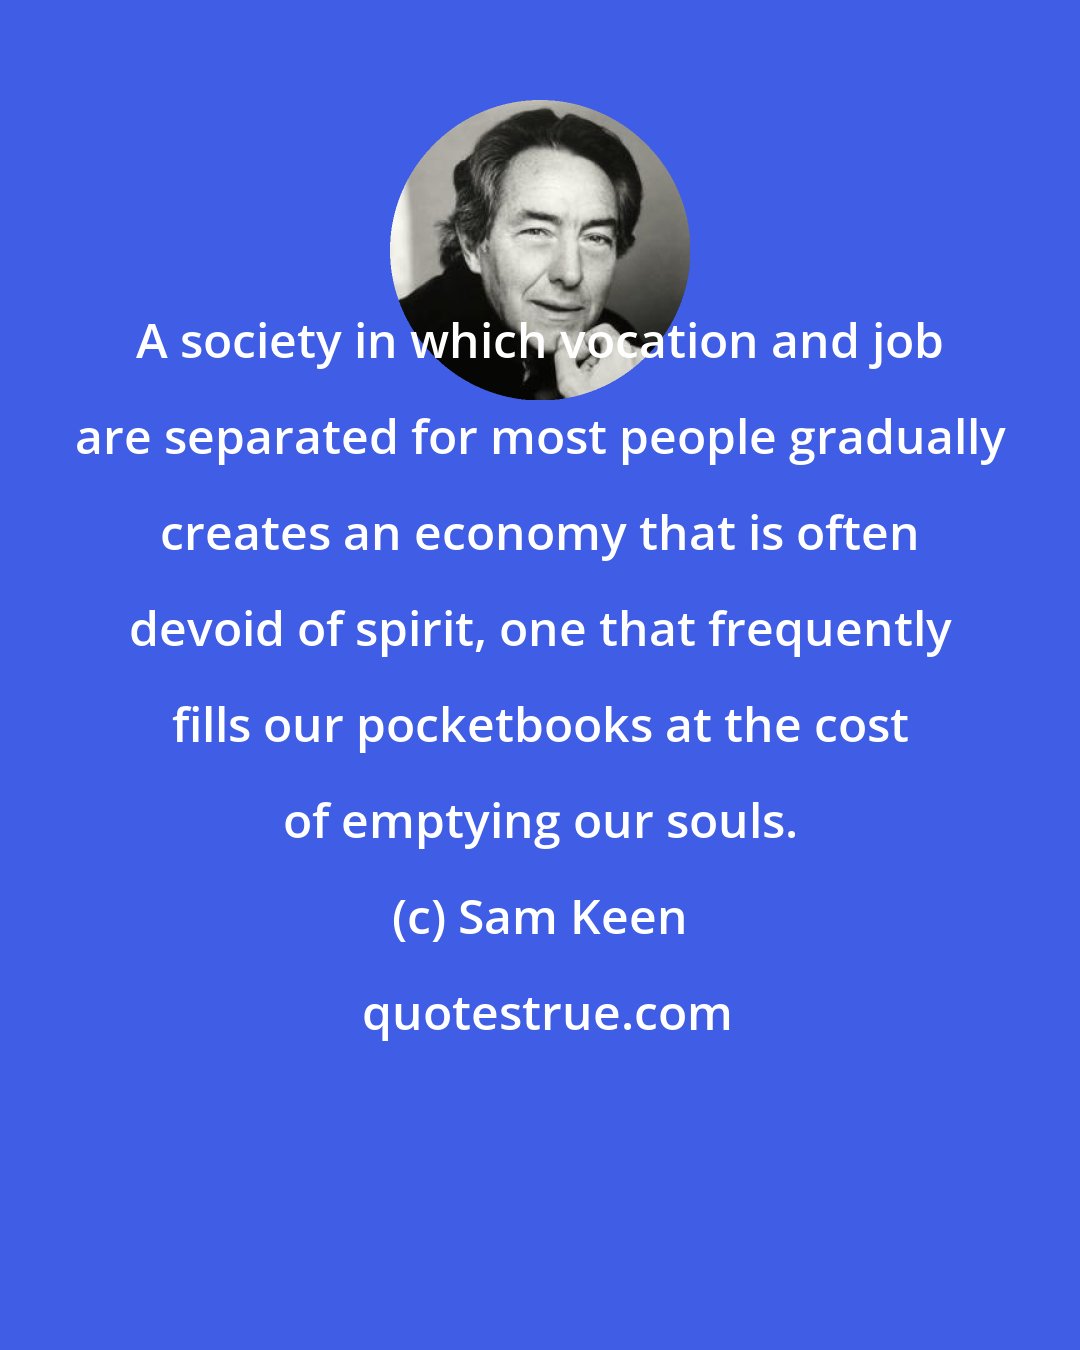 Sam Keen: A society in which vocation and job are separated for most people gradually creates an economy that is often devoid of spirit, one that frequently fills our pocketbooks at the cost of emptying our souls.